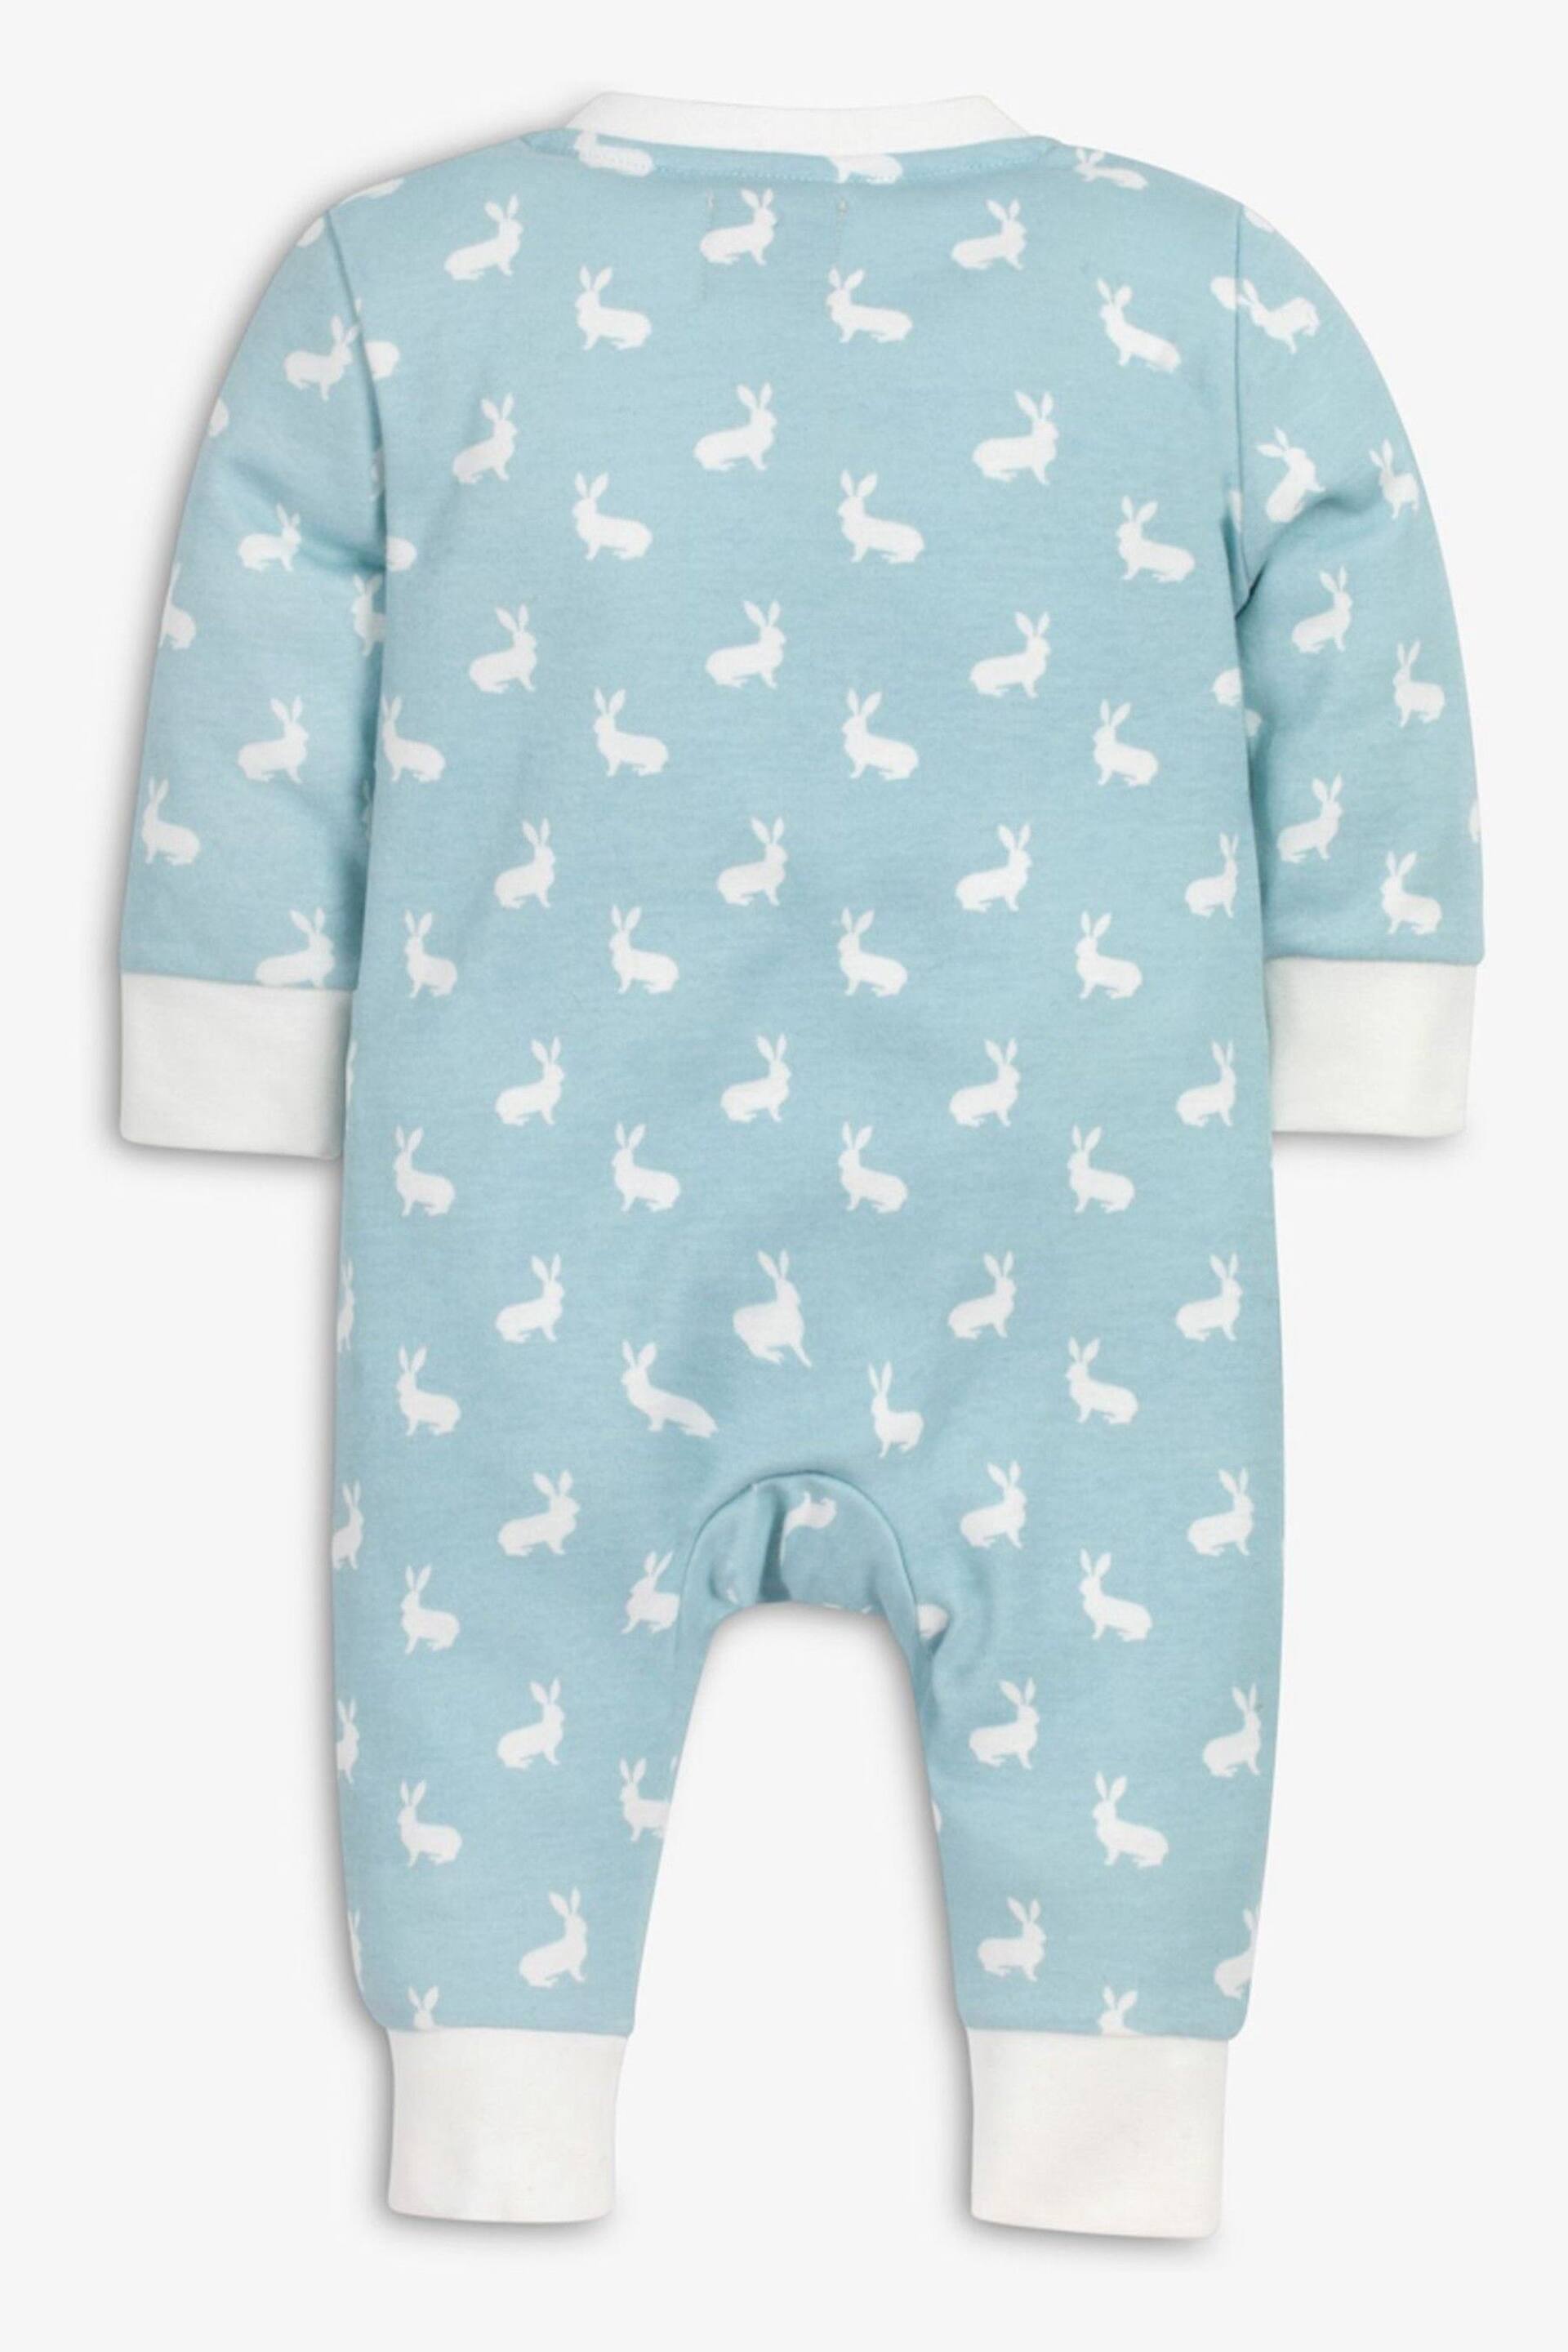 The Little Tailor Baby Front Zip Easter Bunny Print Soft Cotton Sleepsuit - Image 2 of 4